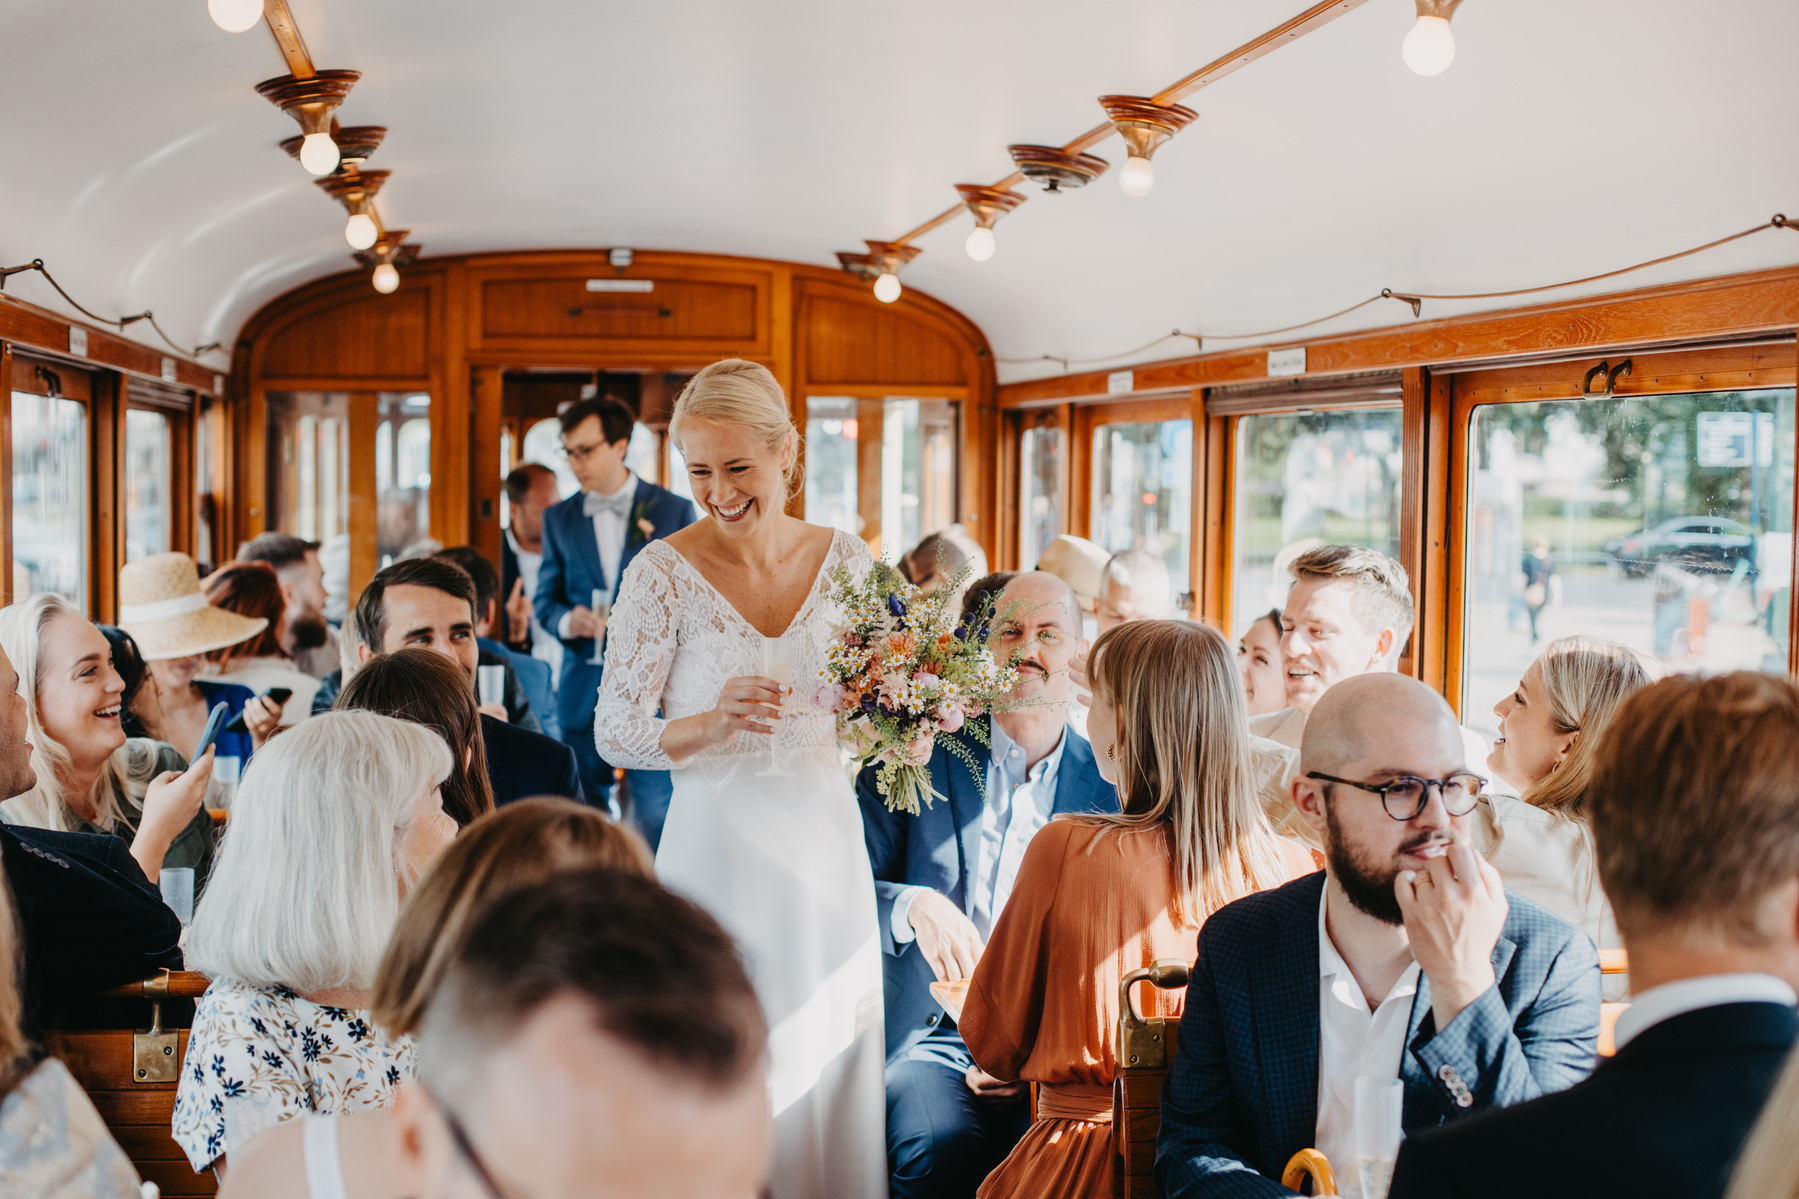 Auto-generated description: A bride in a white dress is holding a bouquet and standing in a tram filled with smiling, well-dressed guests.